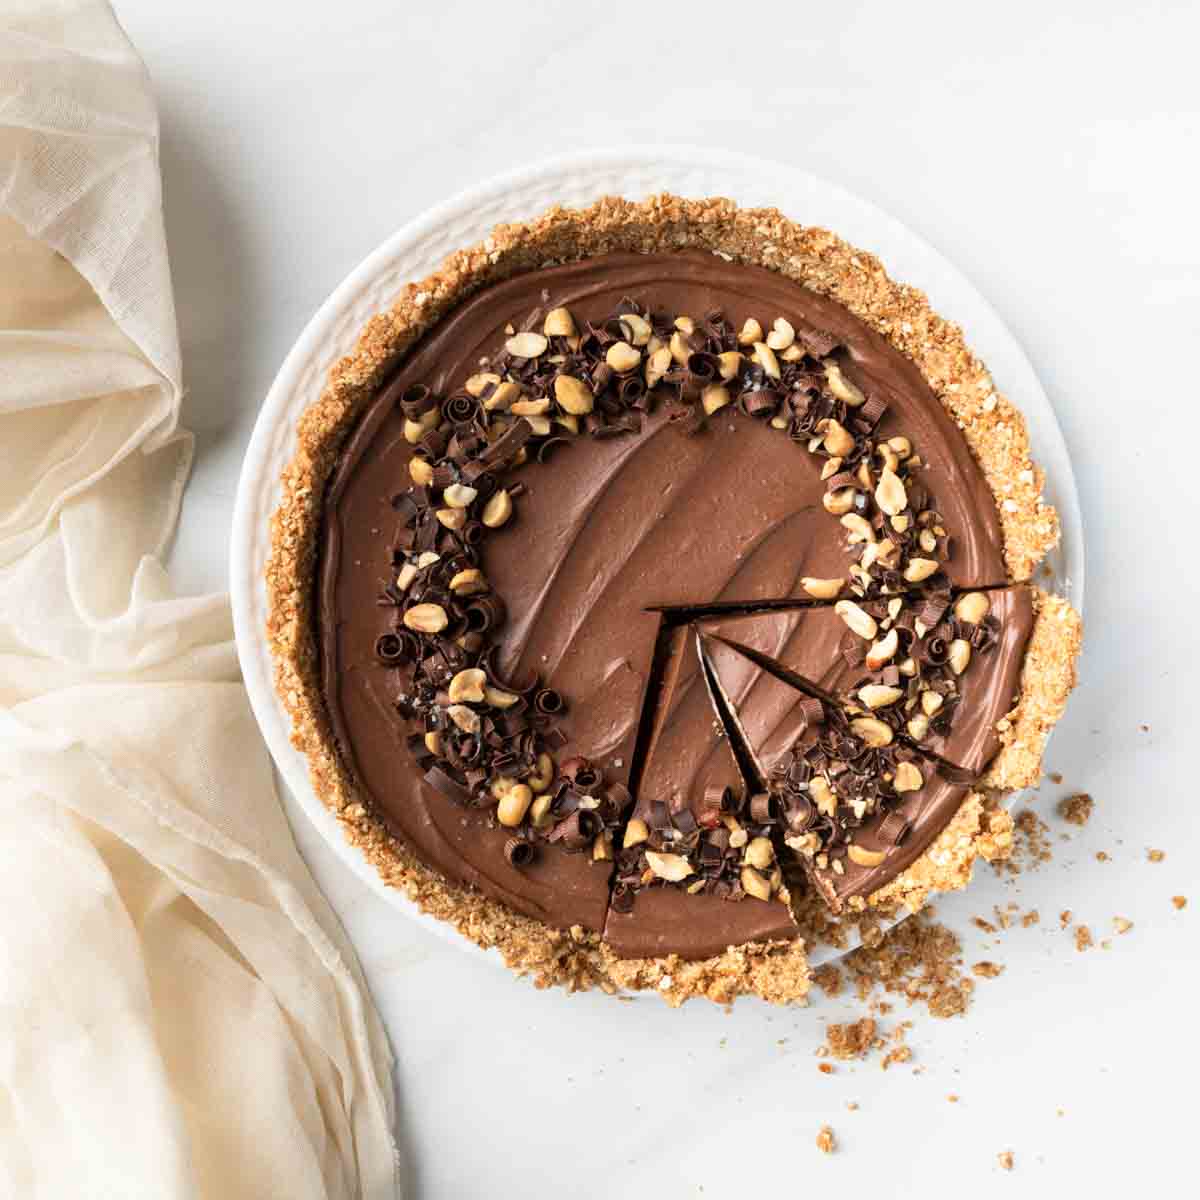 Three slices cut in a whole chocolate peanut butter pie